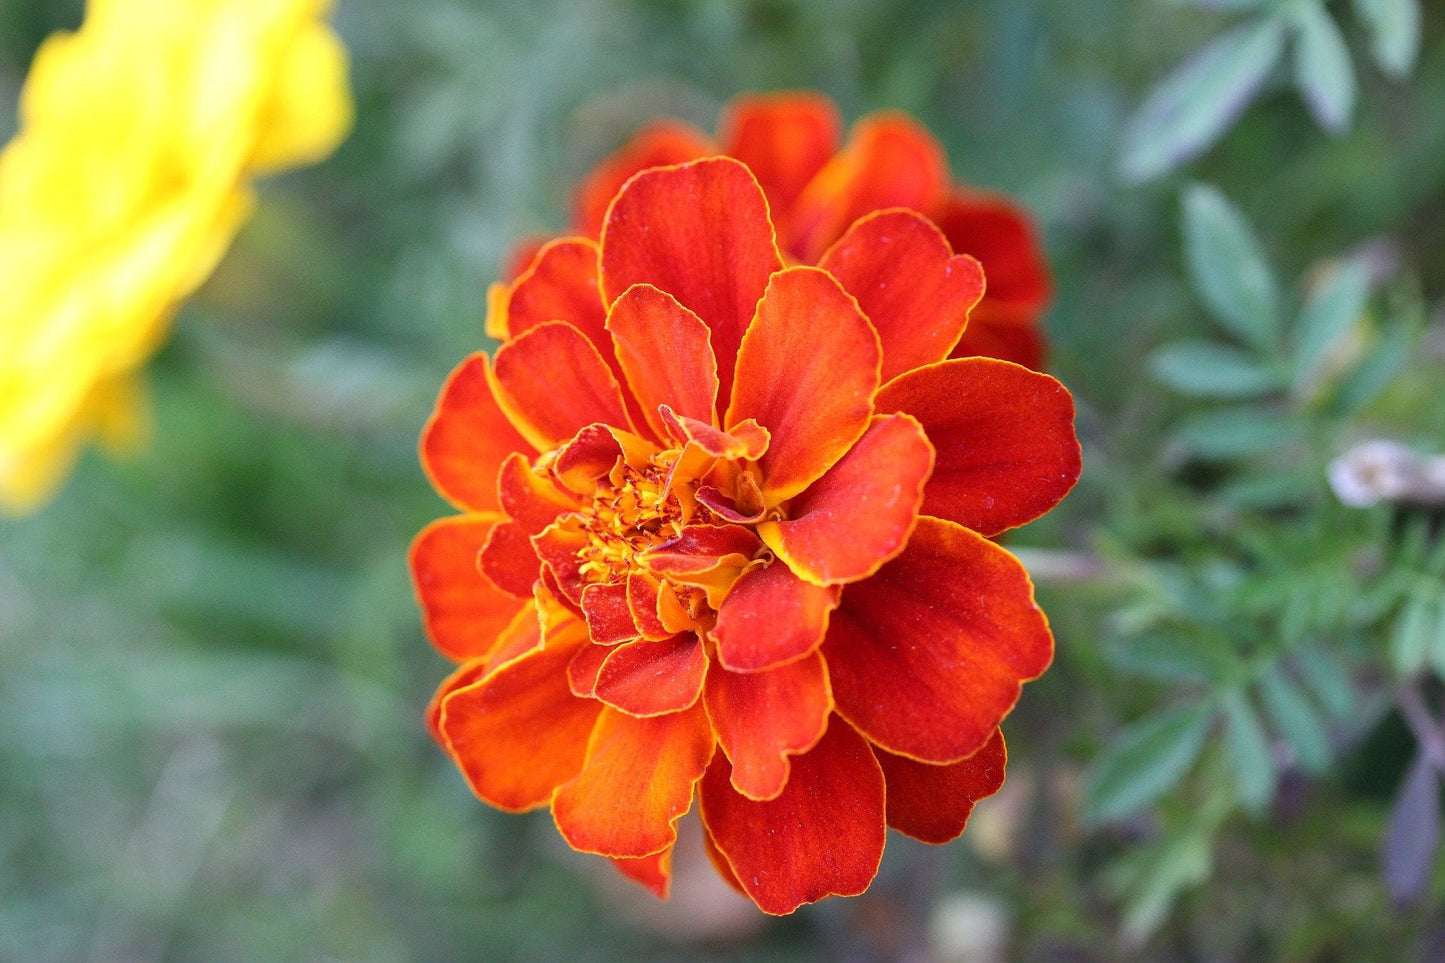 Marigold Seeds - Sparky Mix - Sow True Seed